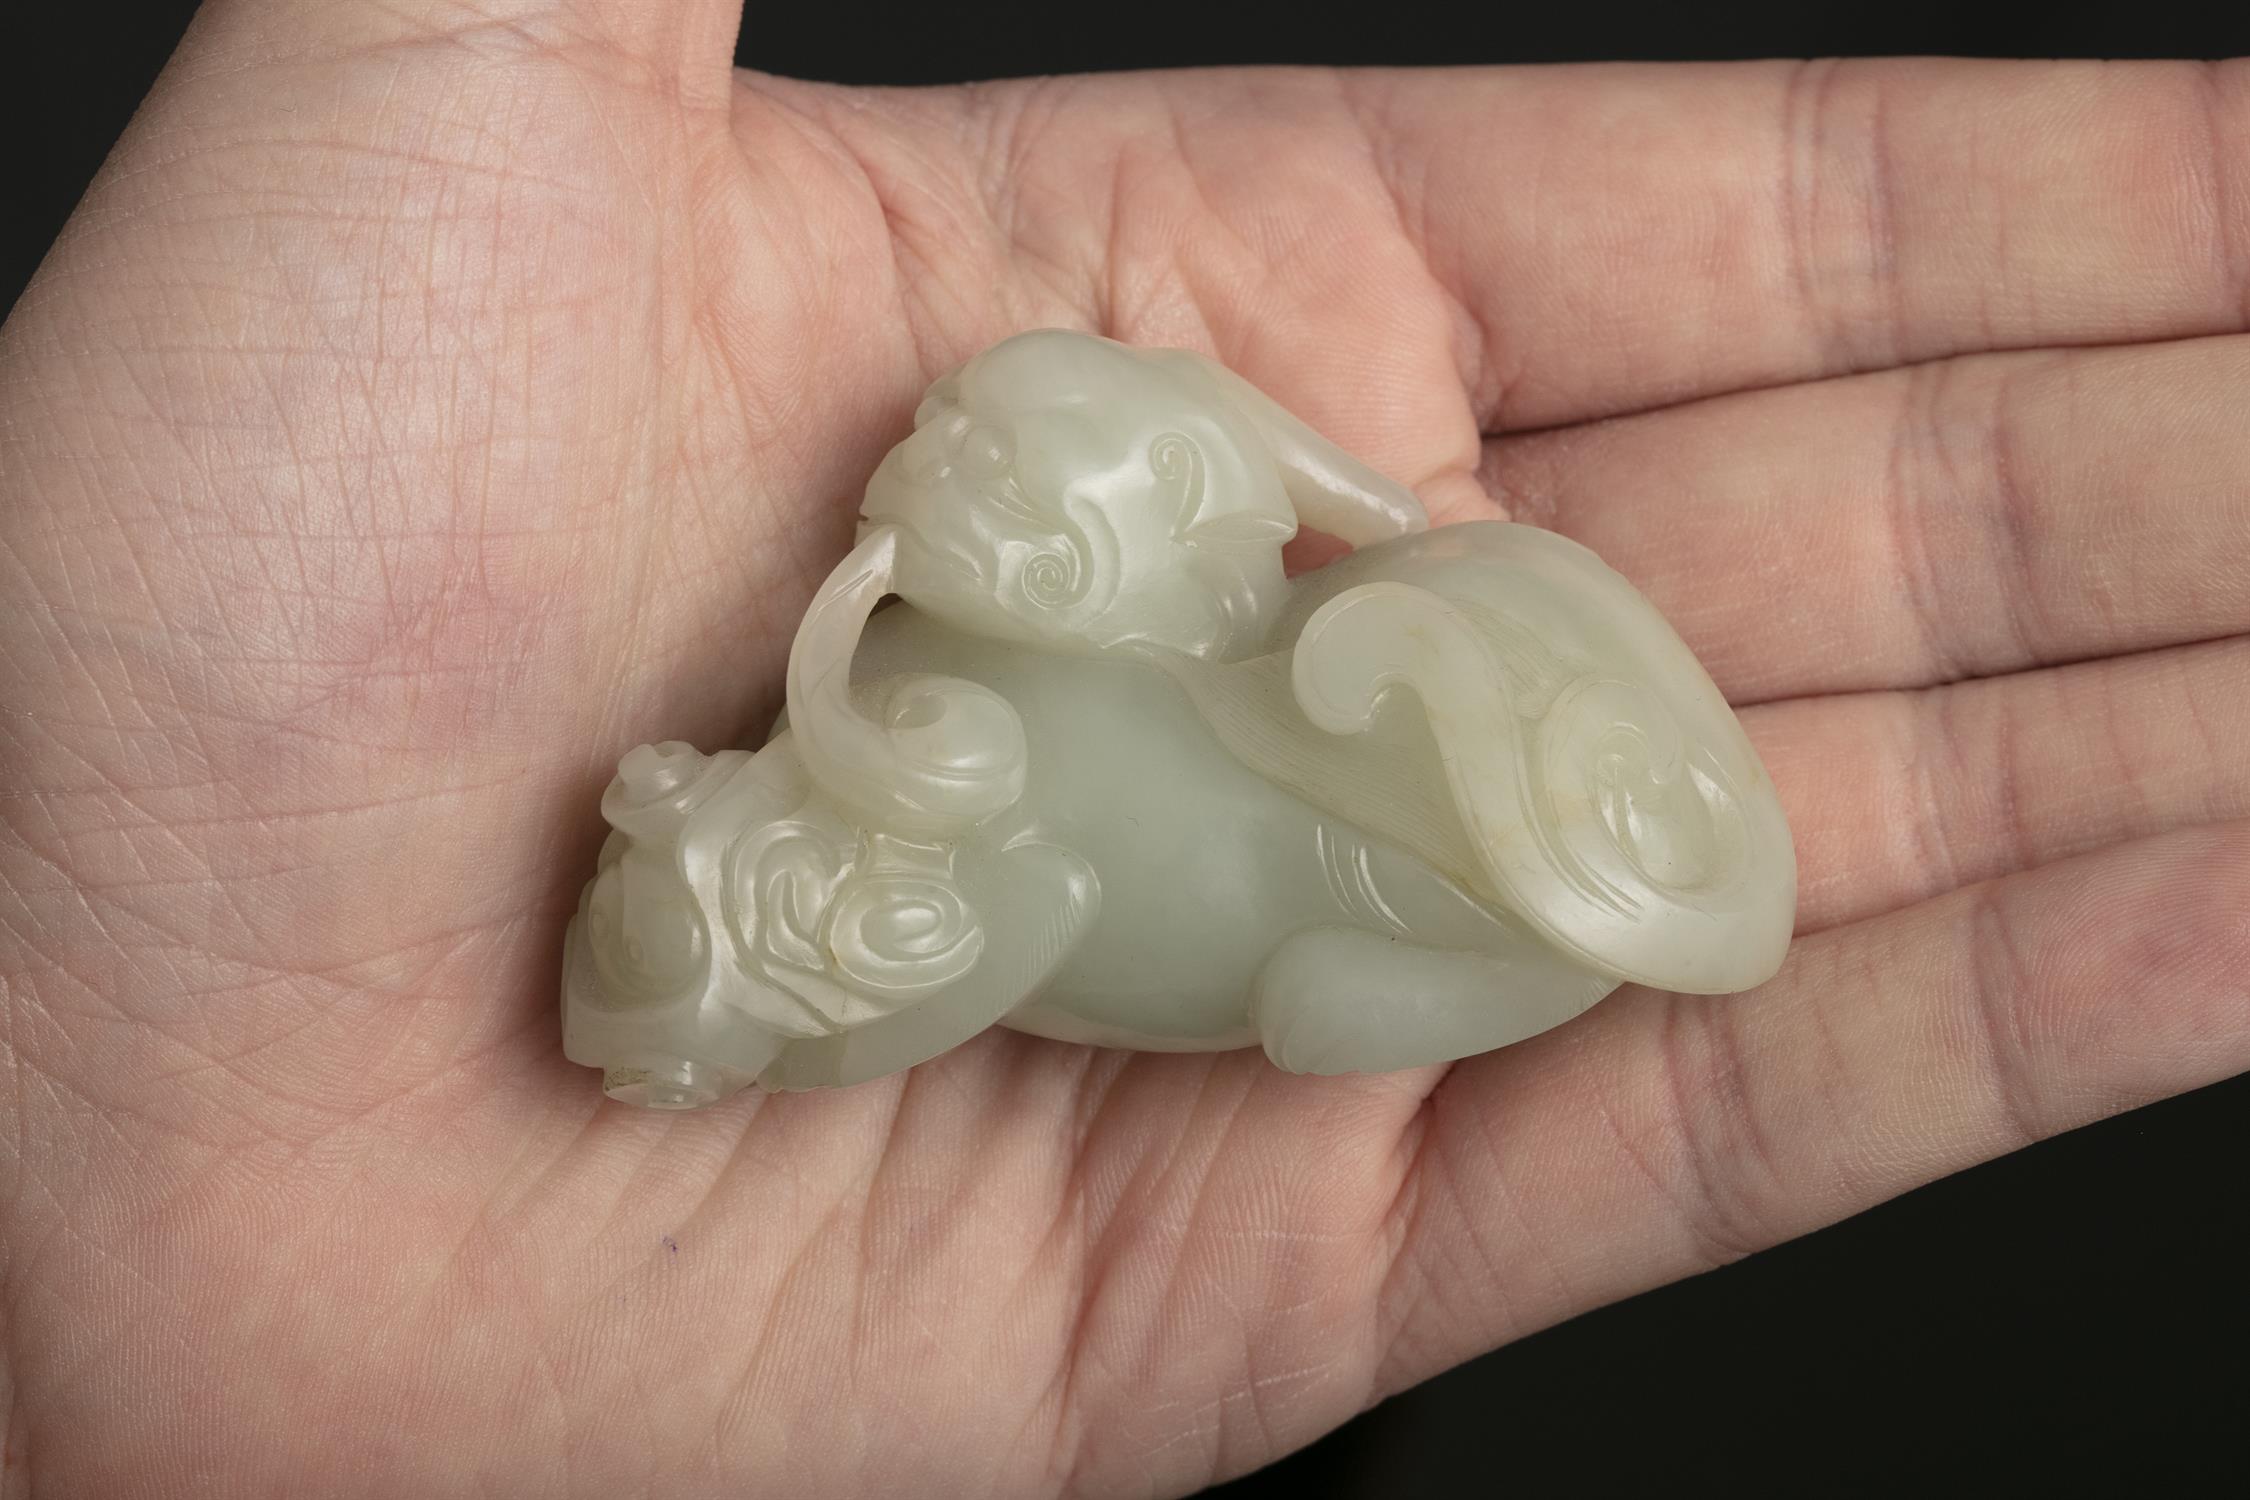 A JADE CARVING OF A PIXIE / BIXIE China, Qing Dynasty, 18th to 19th century Offered at auction - Image 19 of 20